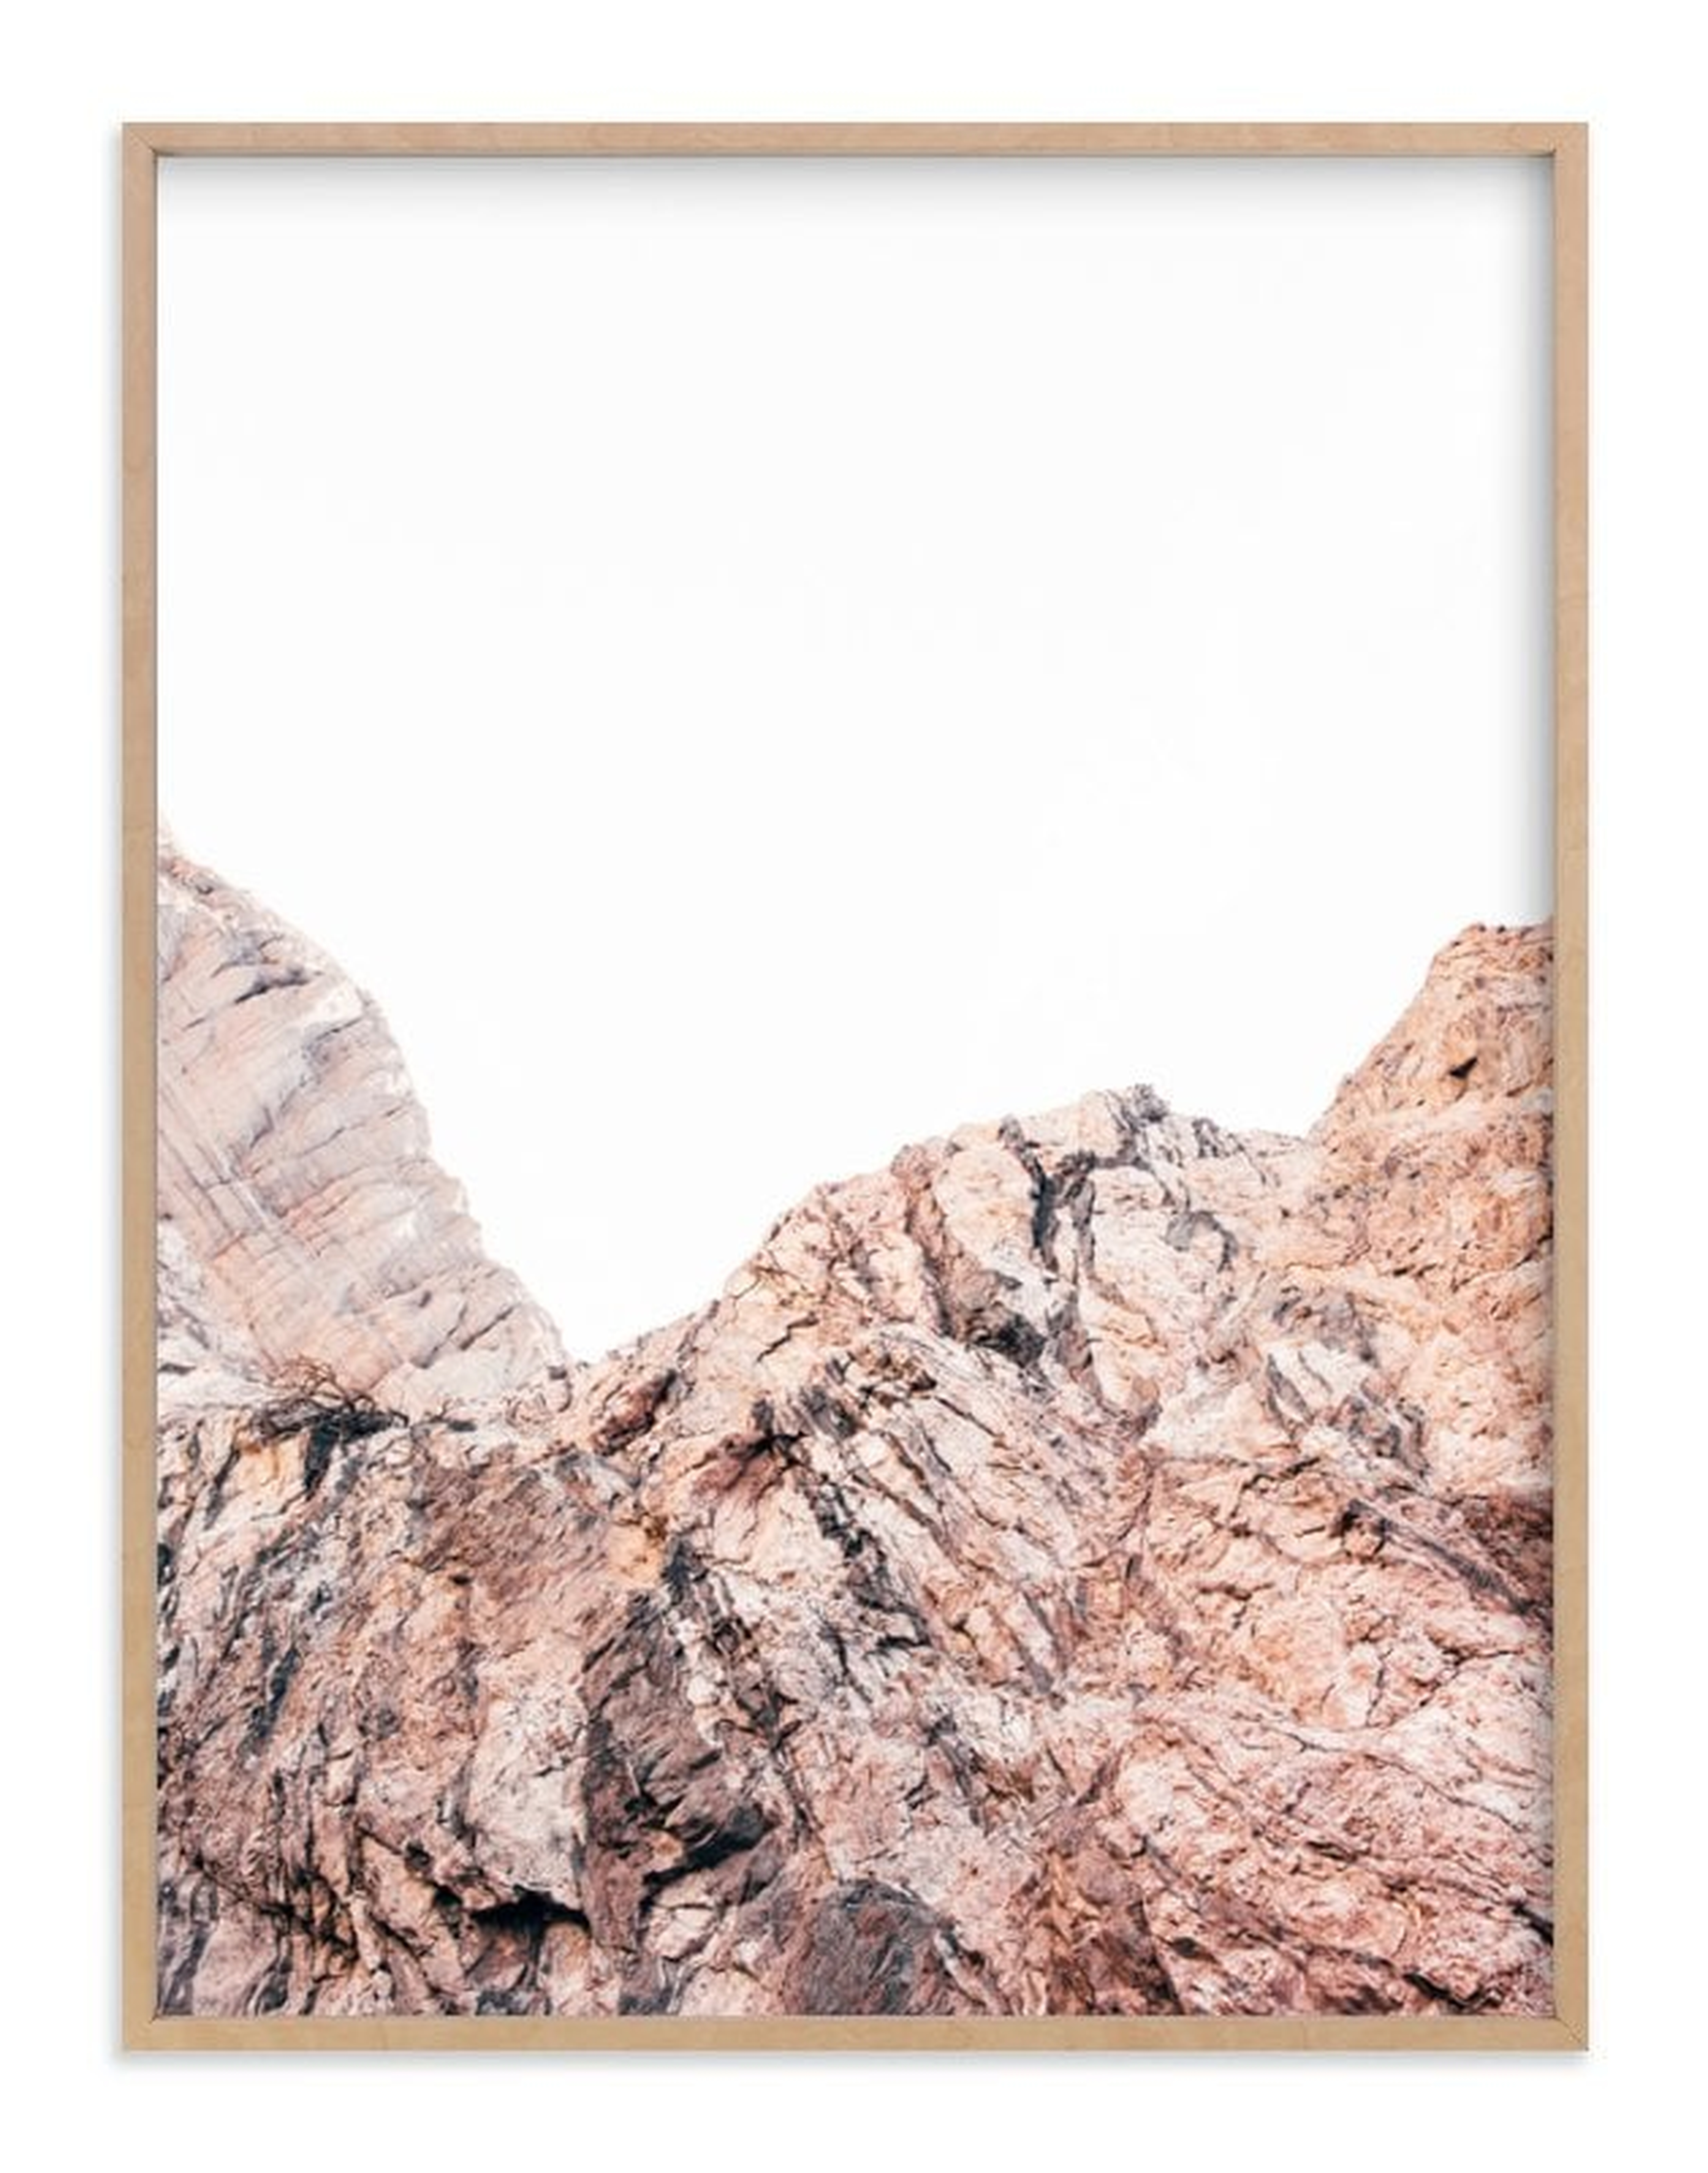 Painted Canyon 5 // Image Size: 30"x40" // Framed Size: 31.3" x 41.3" // Natural Raw Wood Frame .75" - Minted